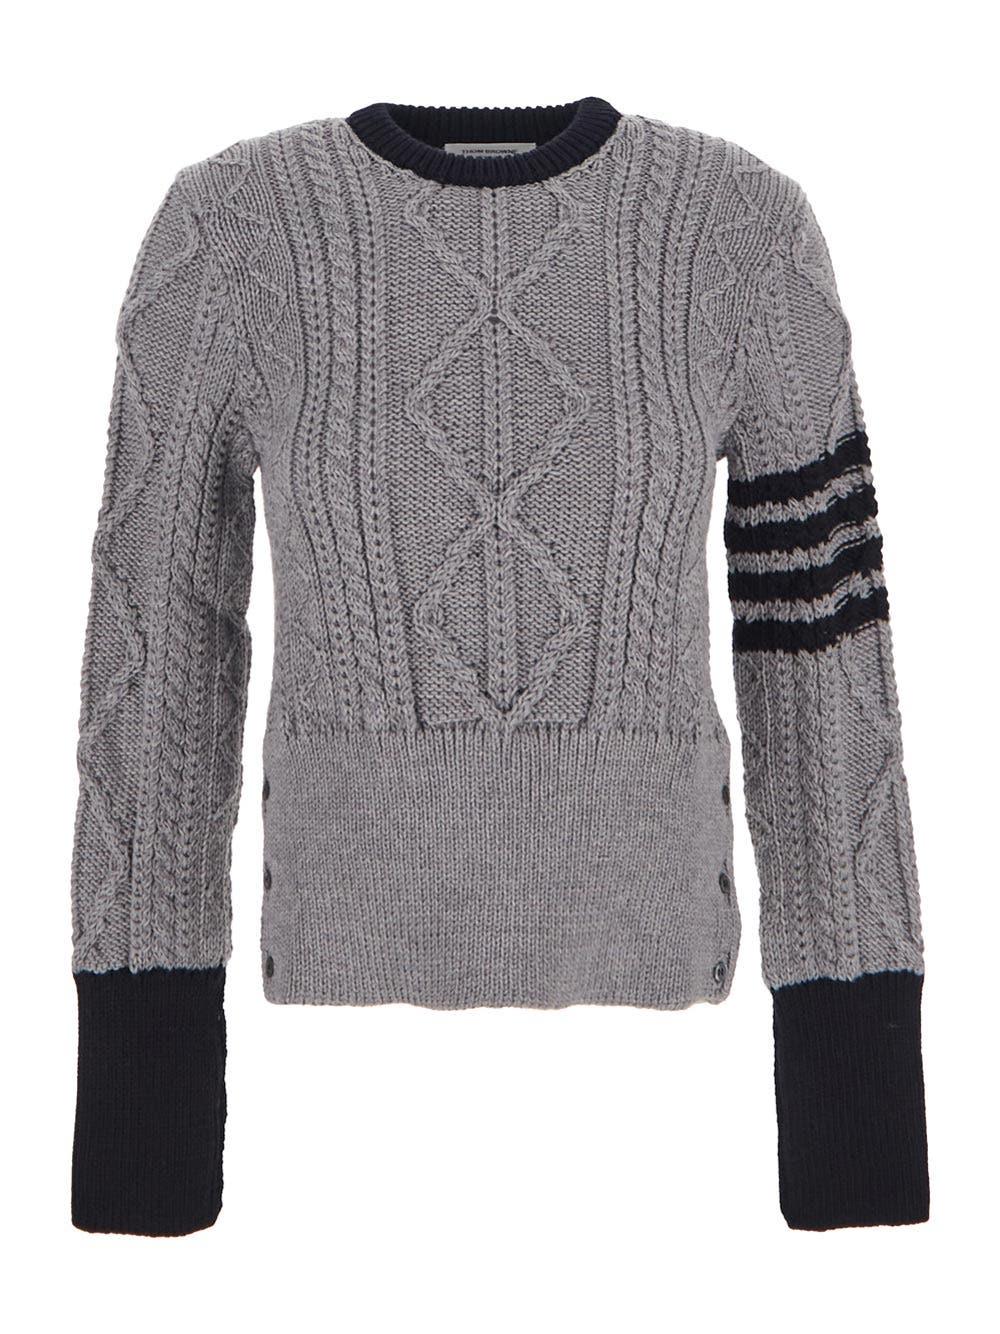 Thom Browne Aran Cable Classic Crewneck Pullover in Gray | Lyst